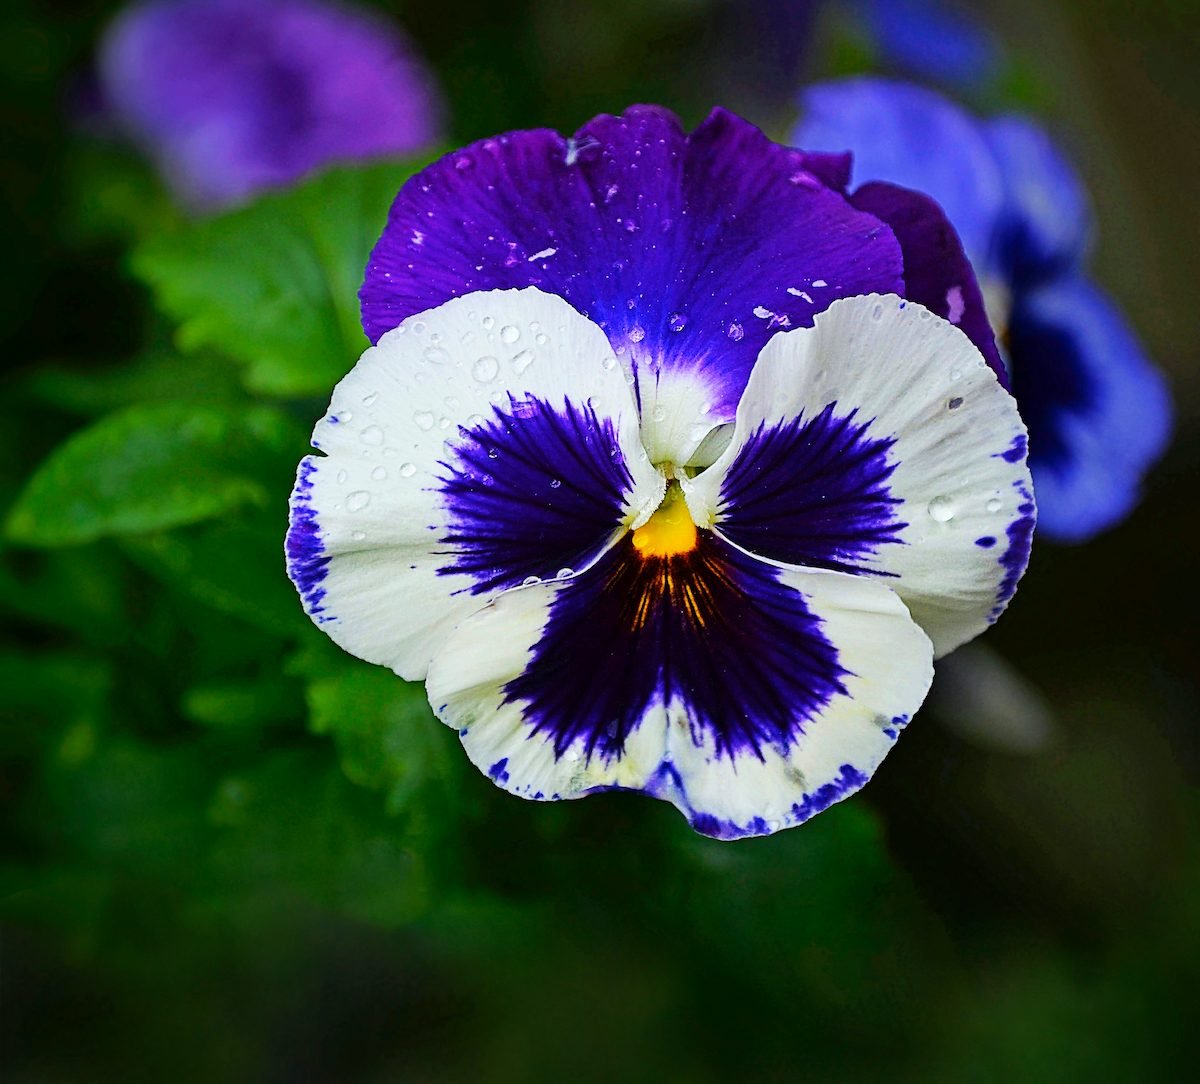 Grow Garden Pansy Flowers for Early Blooms